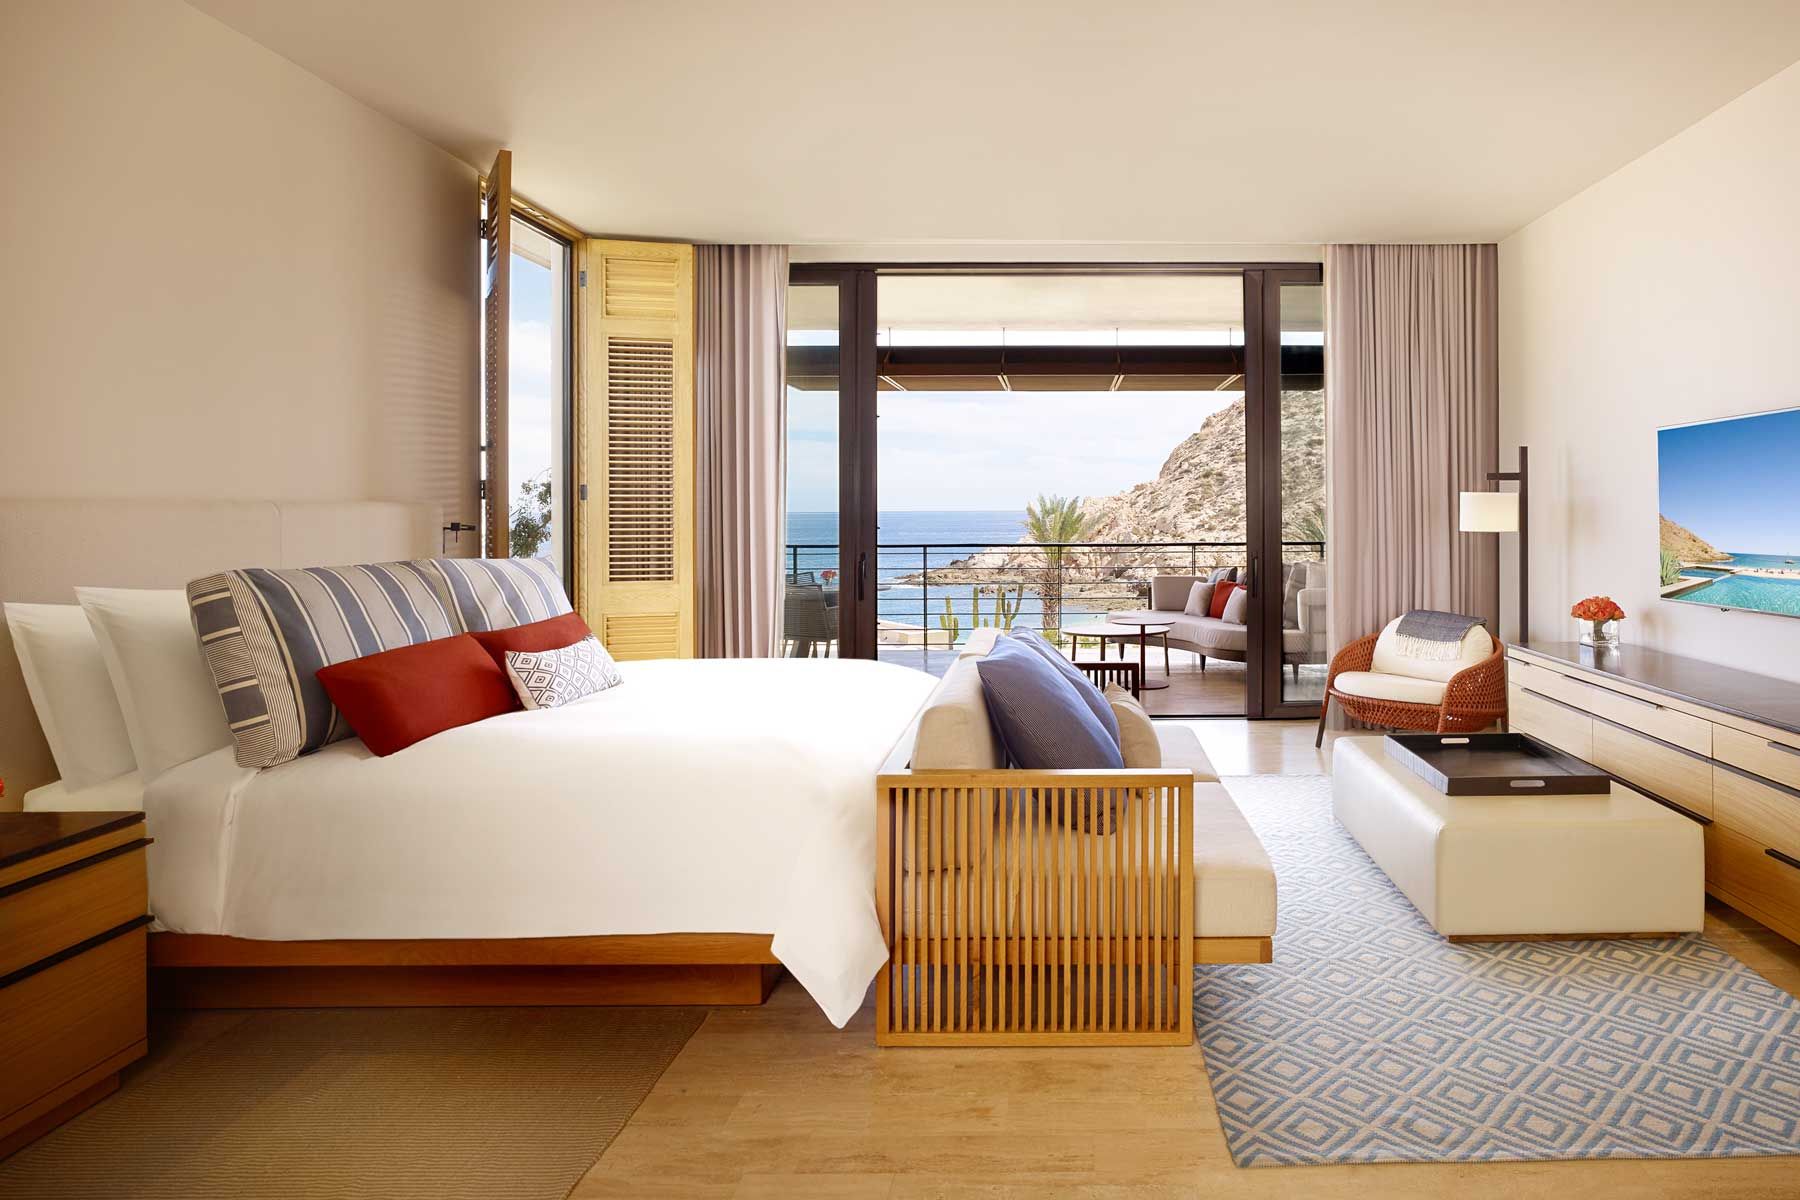 Townhouse-Schlafzimmer im Hotel Montage LOs Cabos